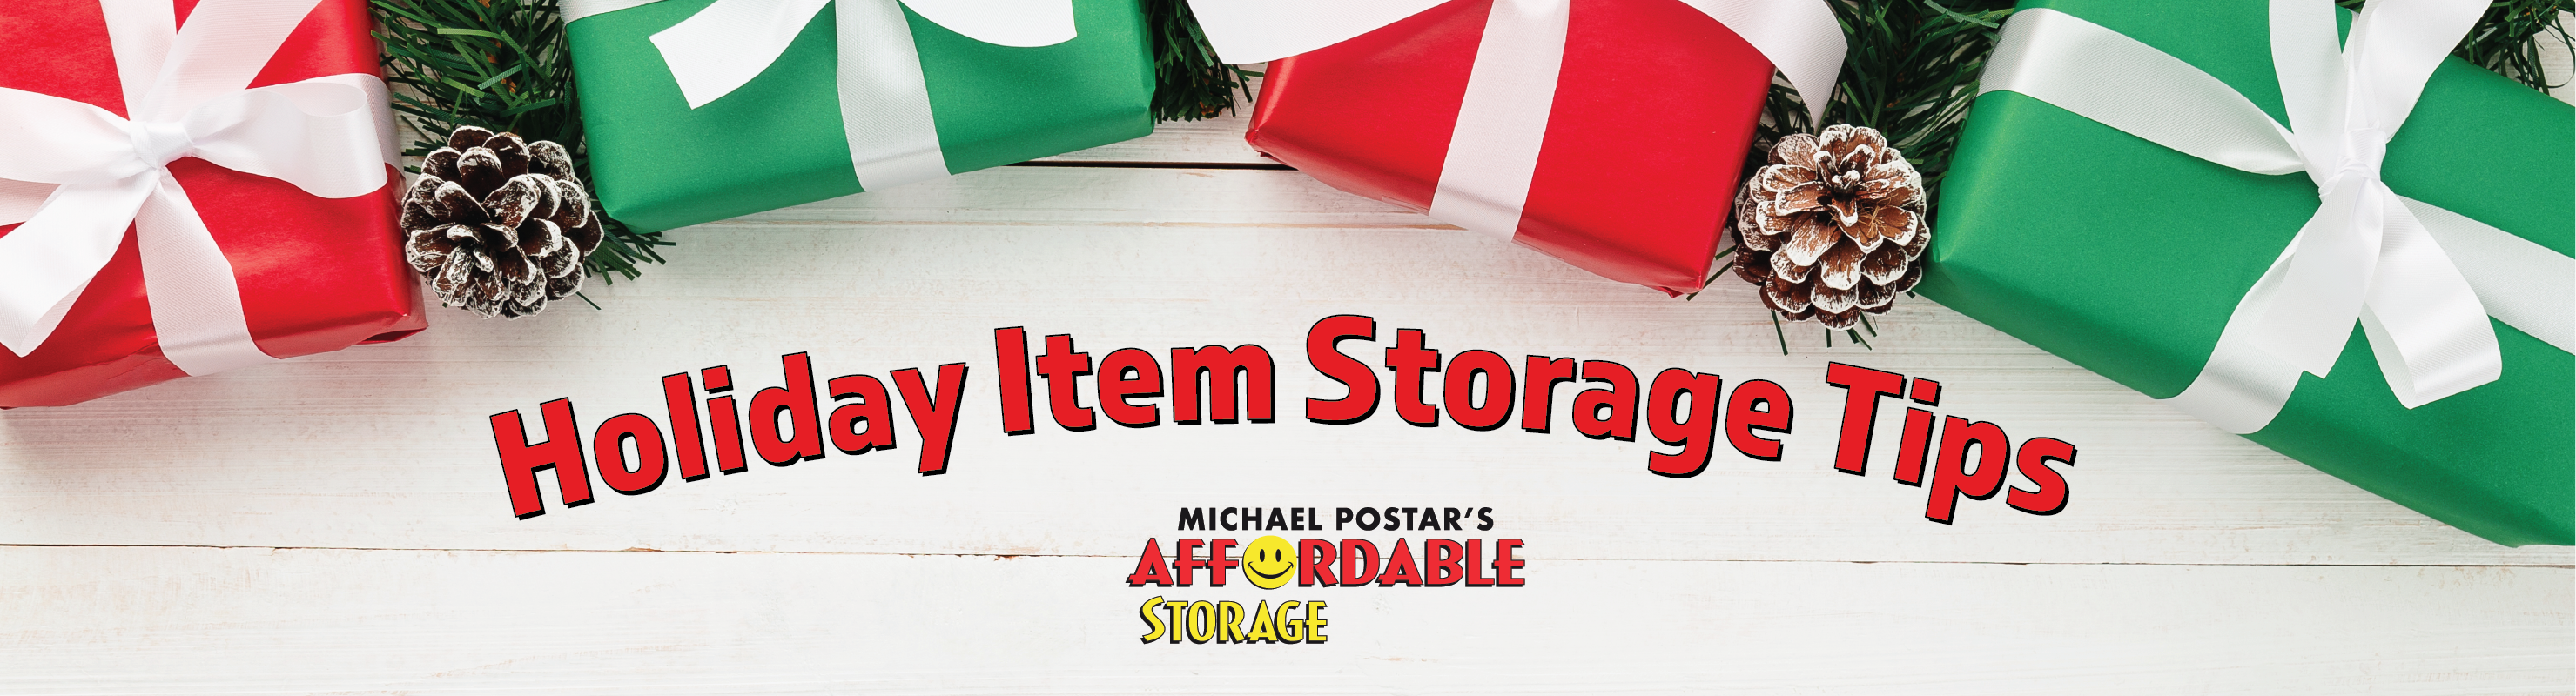 Holiday storage tips brought to you by Affordable Storage